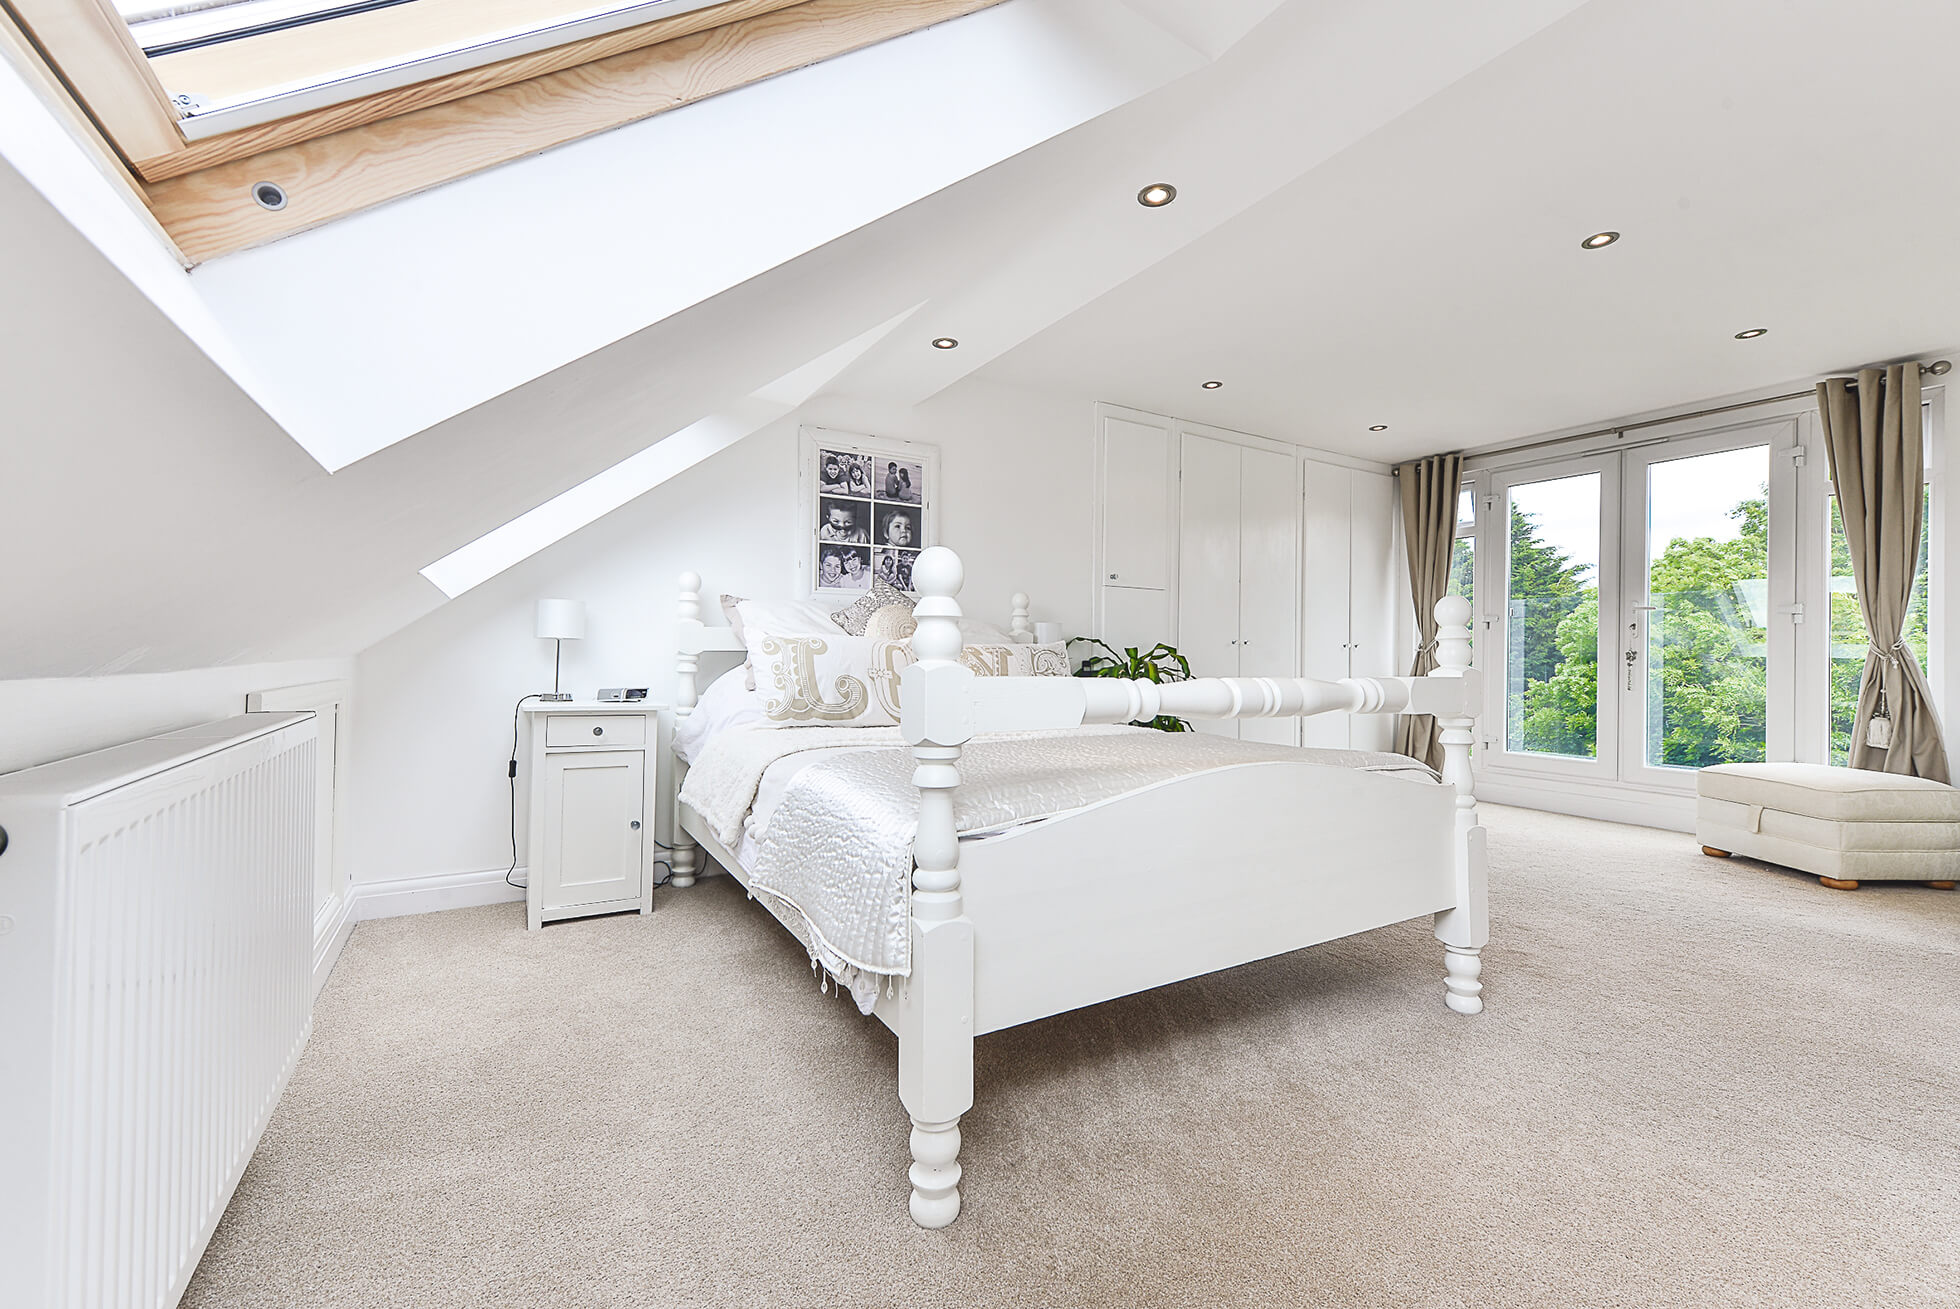 Do you have a question about converting your Loft in Broxbourne? Here are the most popular questions asked by our clients.